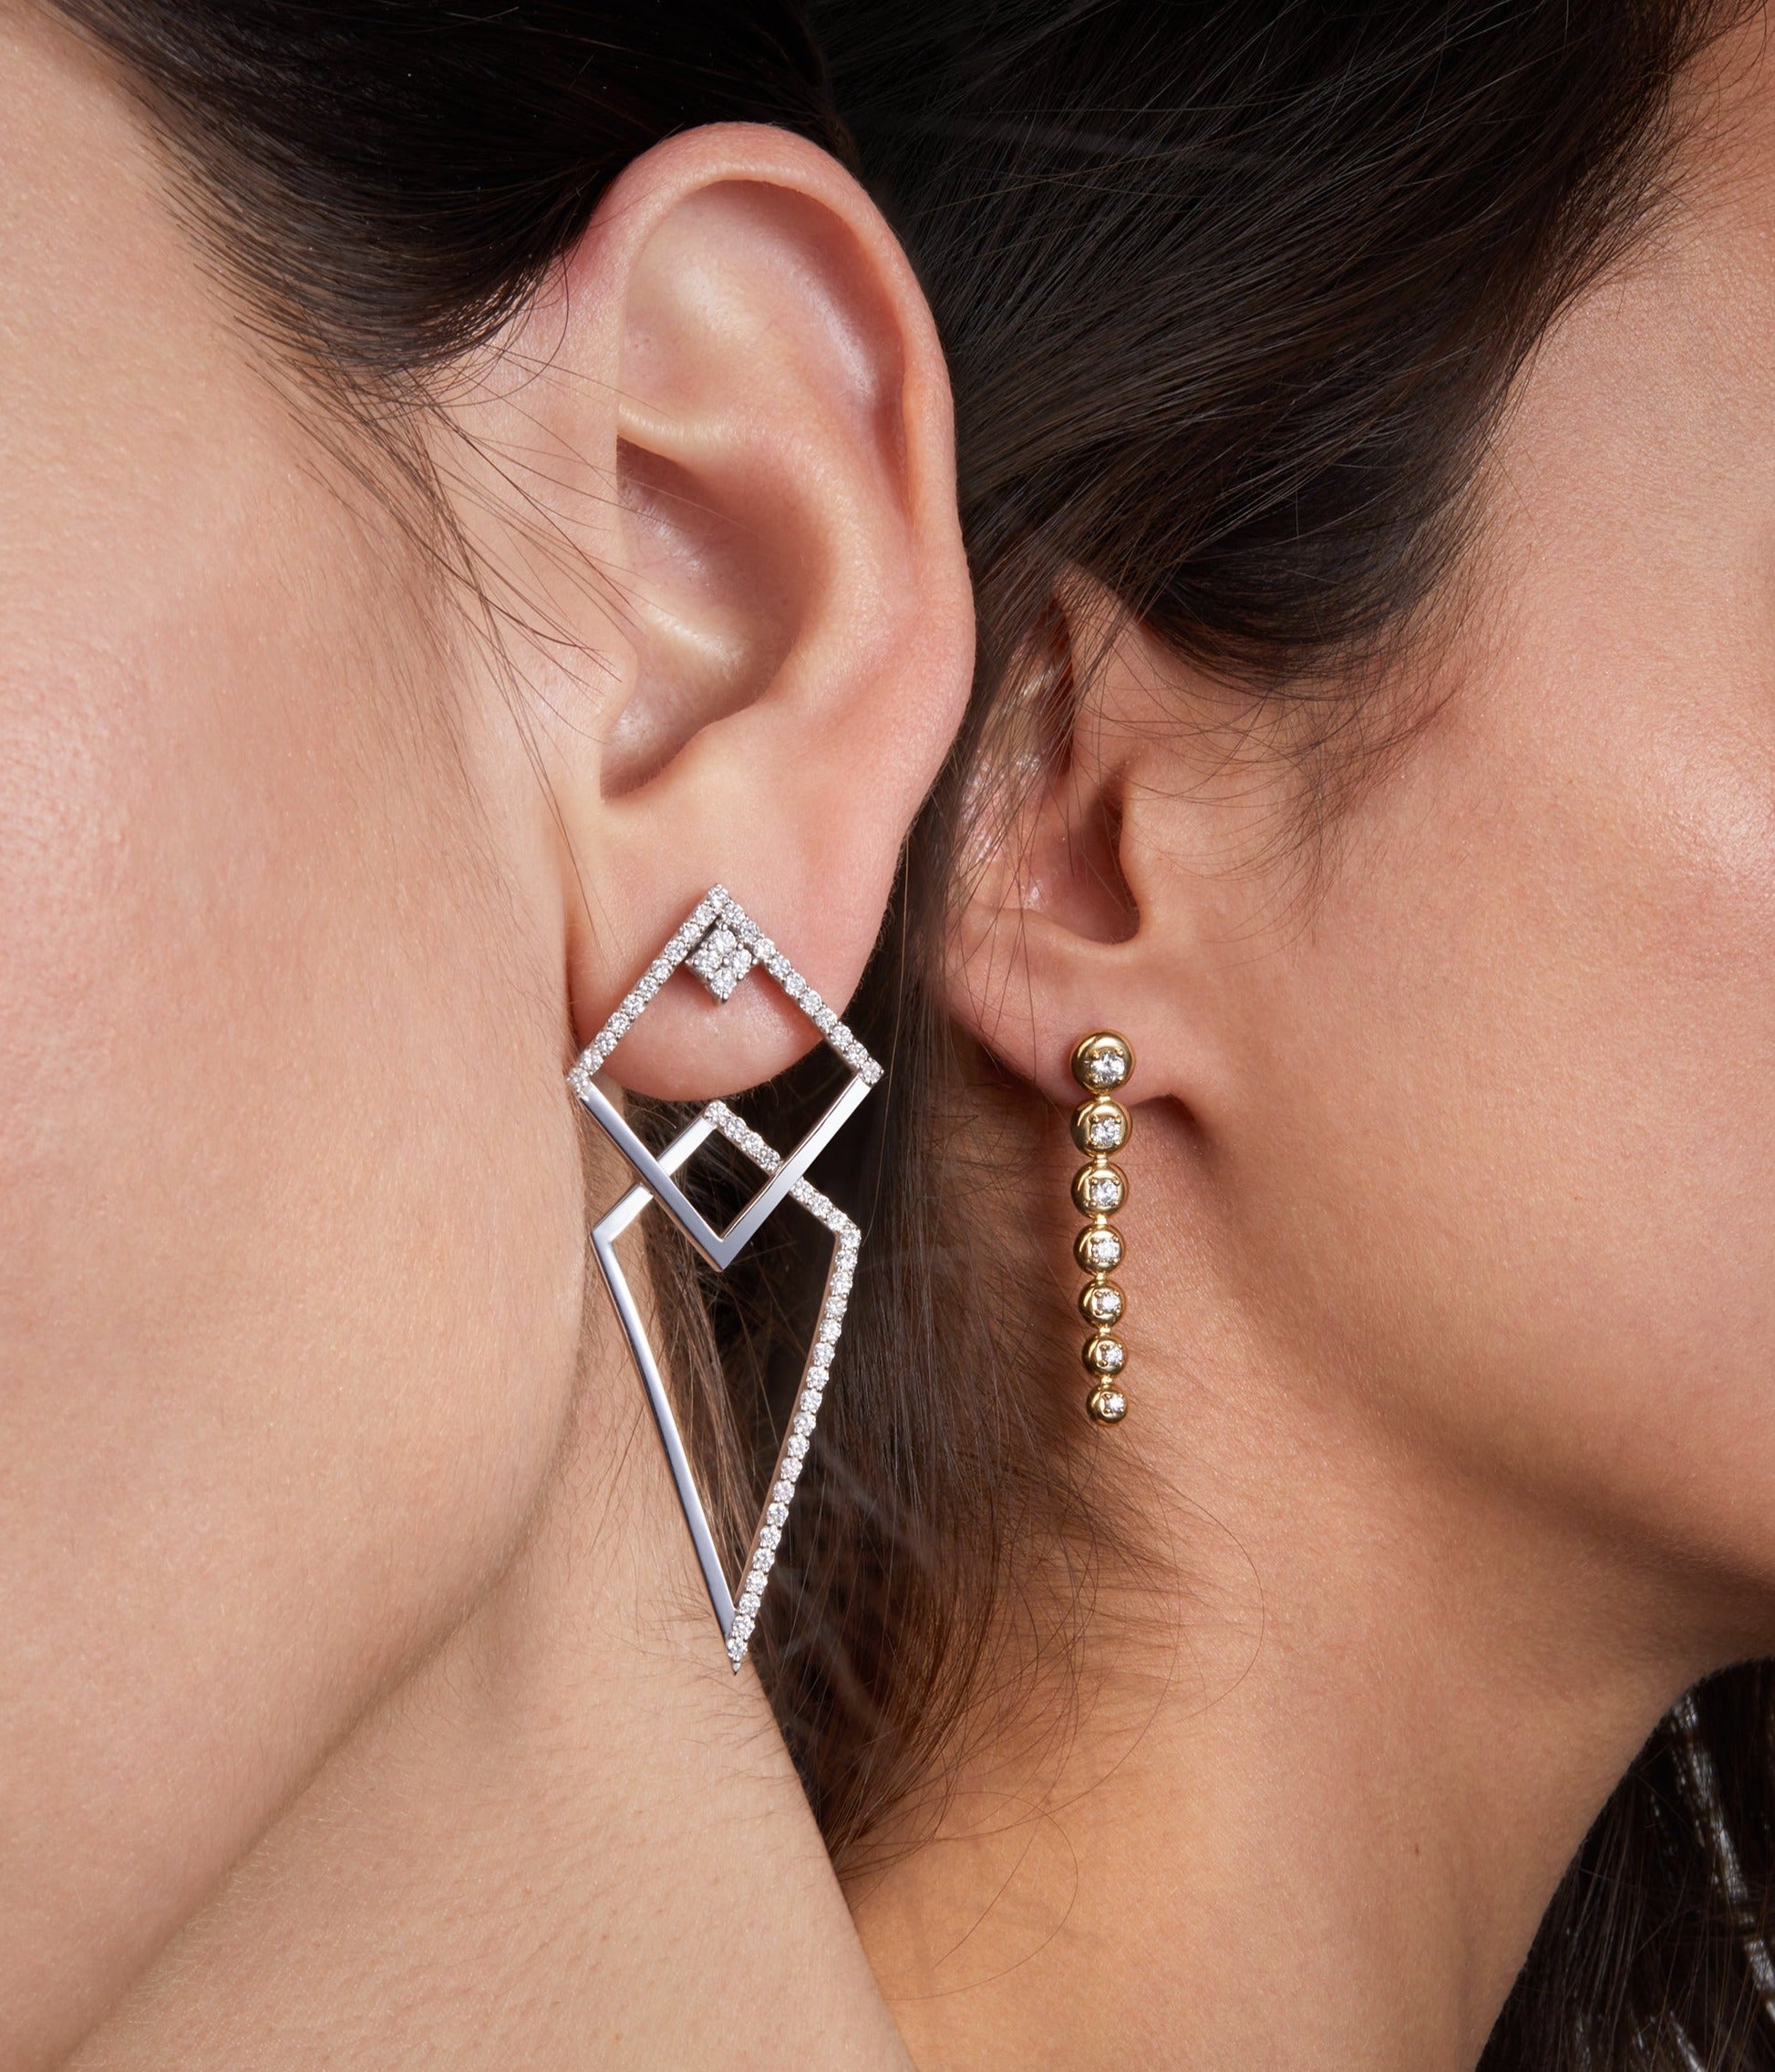 Thunder white gold earrings with star trail earrings illustrated on two different models that shows their versatility and how they can be worn into one design.